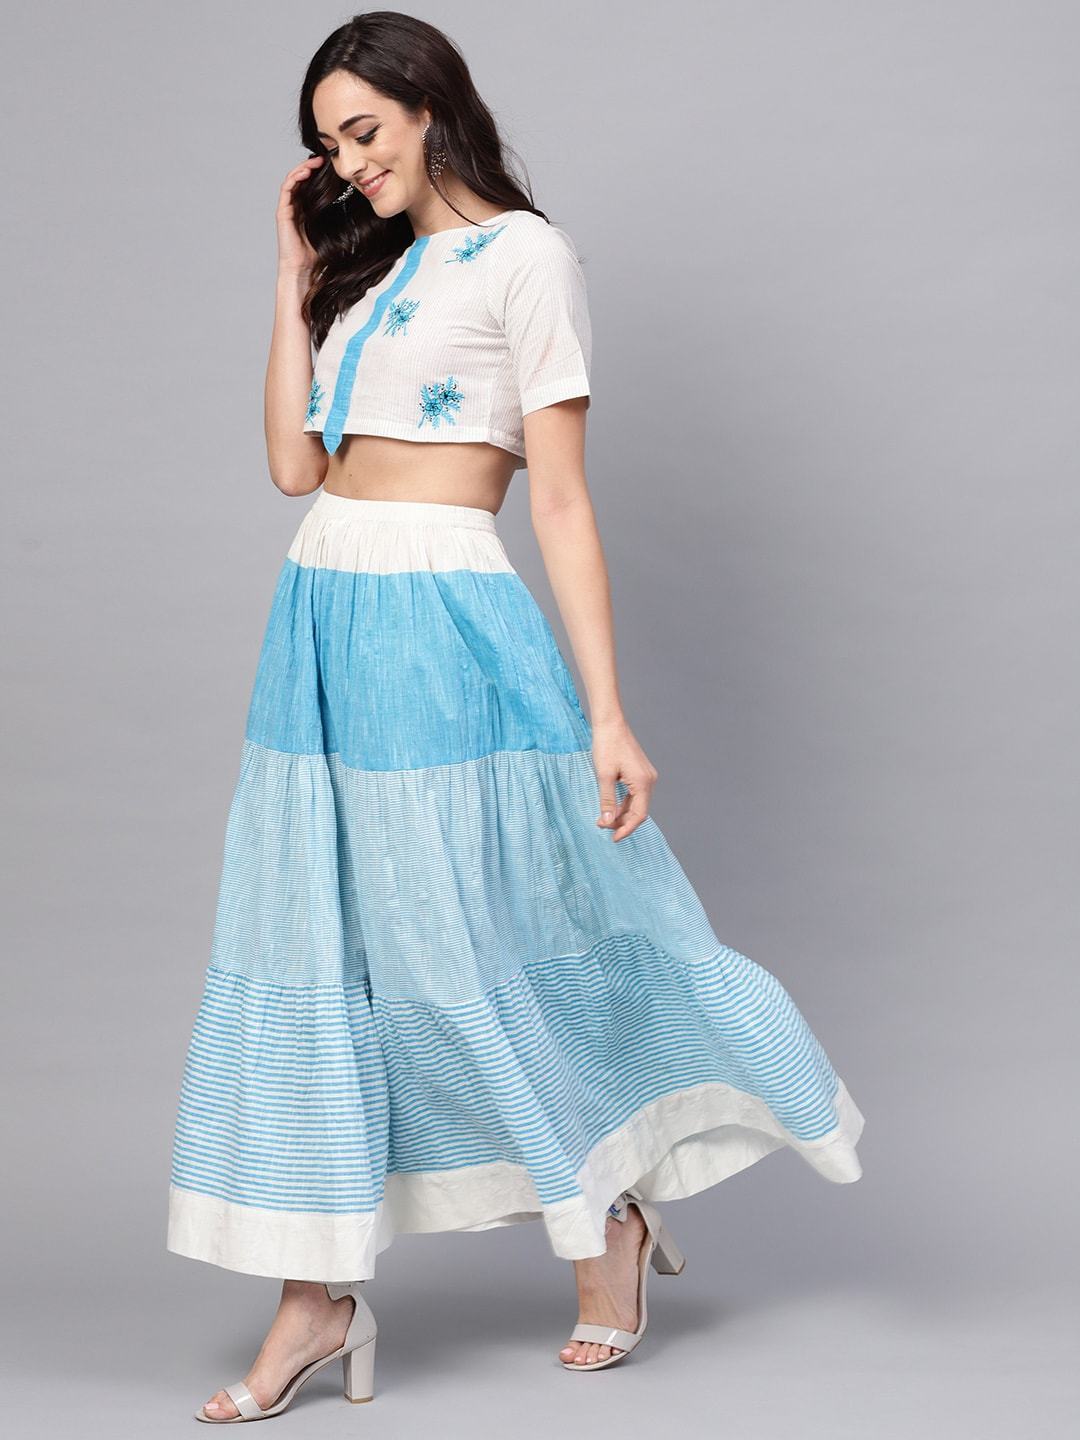 Women's Handloom Embroidered Top With Skirt - Pannkh